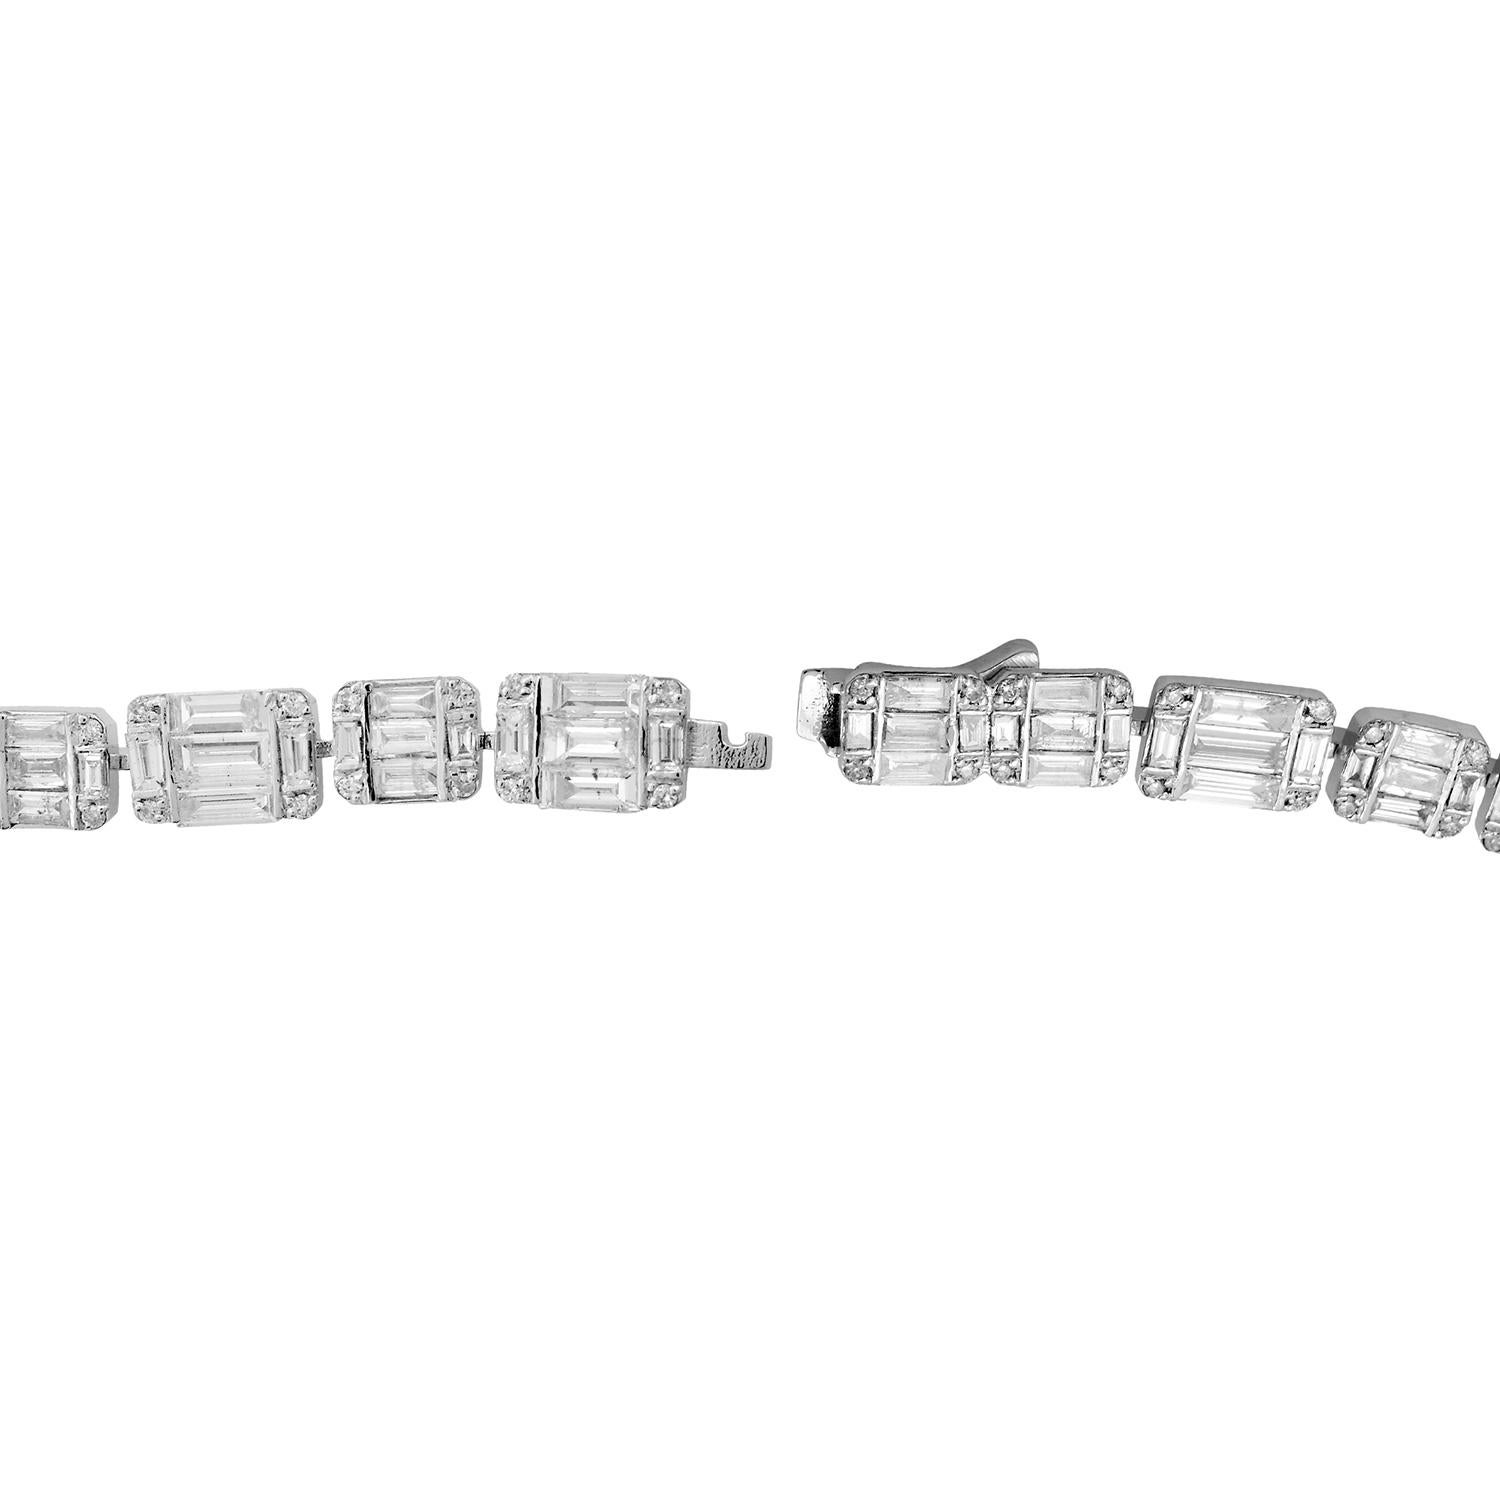 Item Code :- CN-9103
Gross Wt. :- 13.83 grams
18k White Gold Wt. :- 12.39 grams
Diamond Wt. :- 7.20 Ct. ( AVERAGE DIAMOND CLARITY SI1-SI2 & COLOR H-I )
Bracelet Length :- 7 Inch
✦ Sizing
.....................
We can adjust most items to fit your